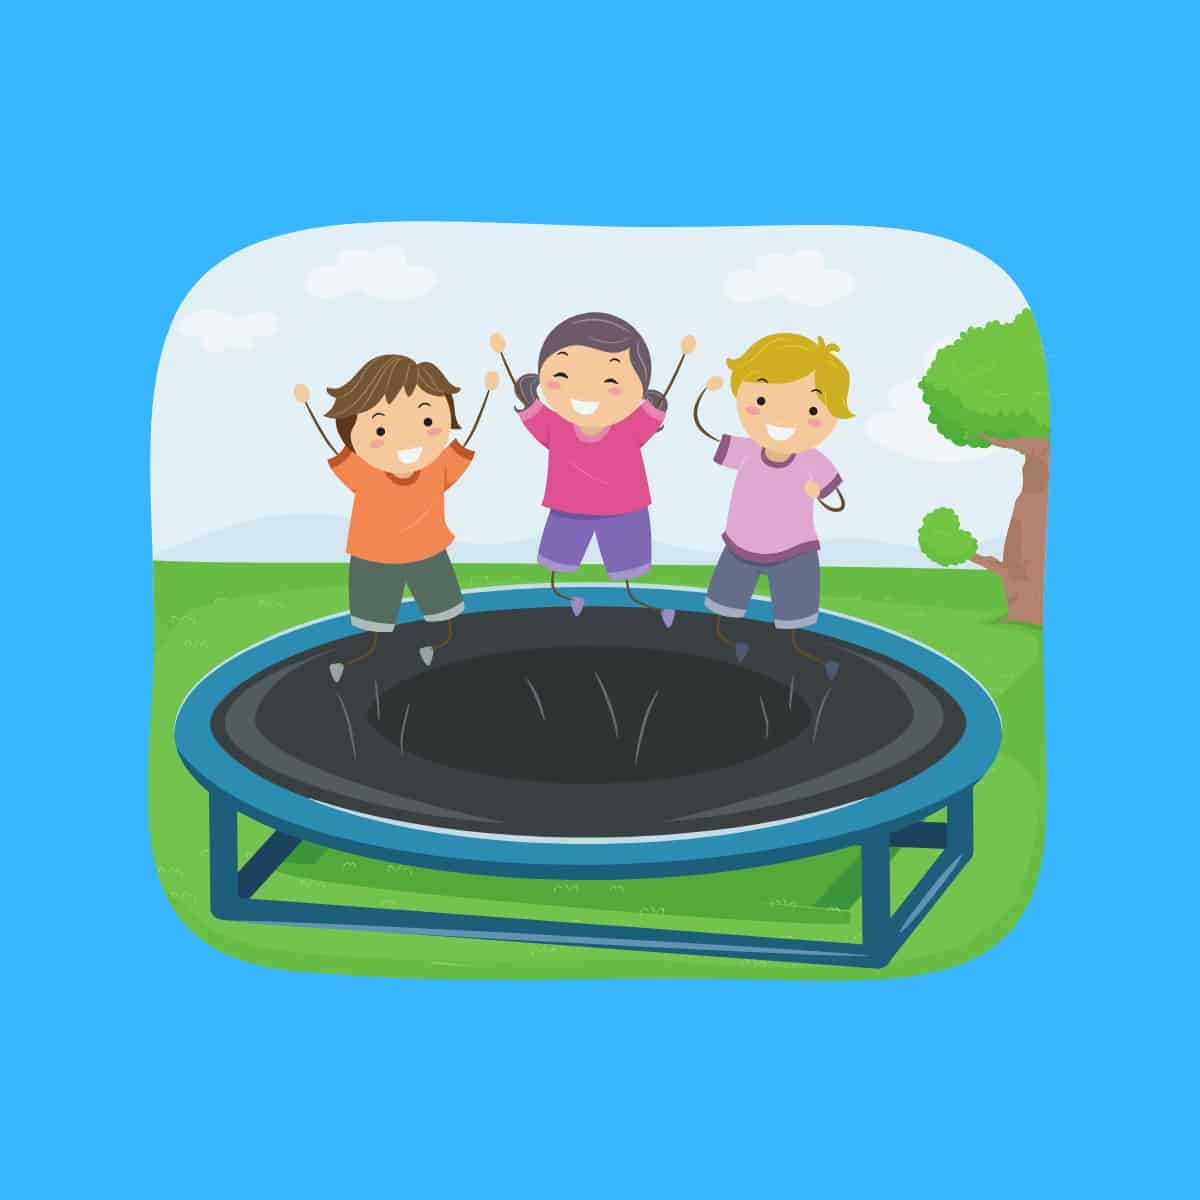 Cartoon graphic of 3 young kids smiling and jumping on a trampoline on a blue background.